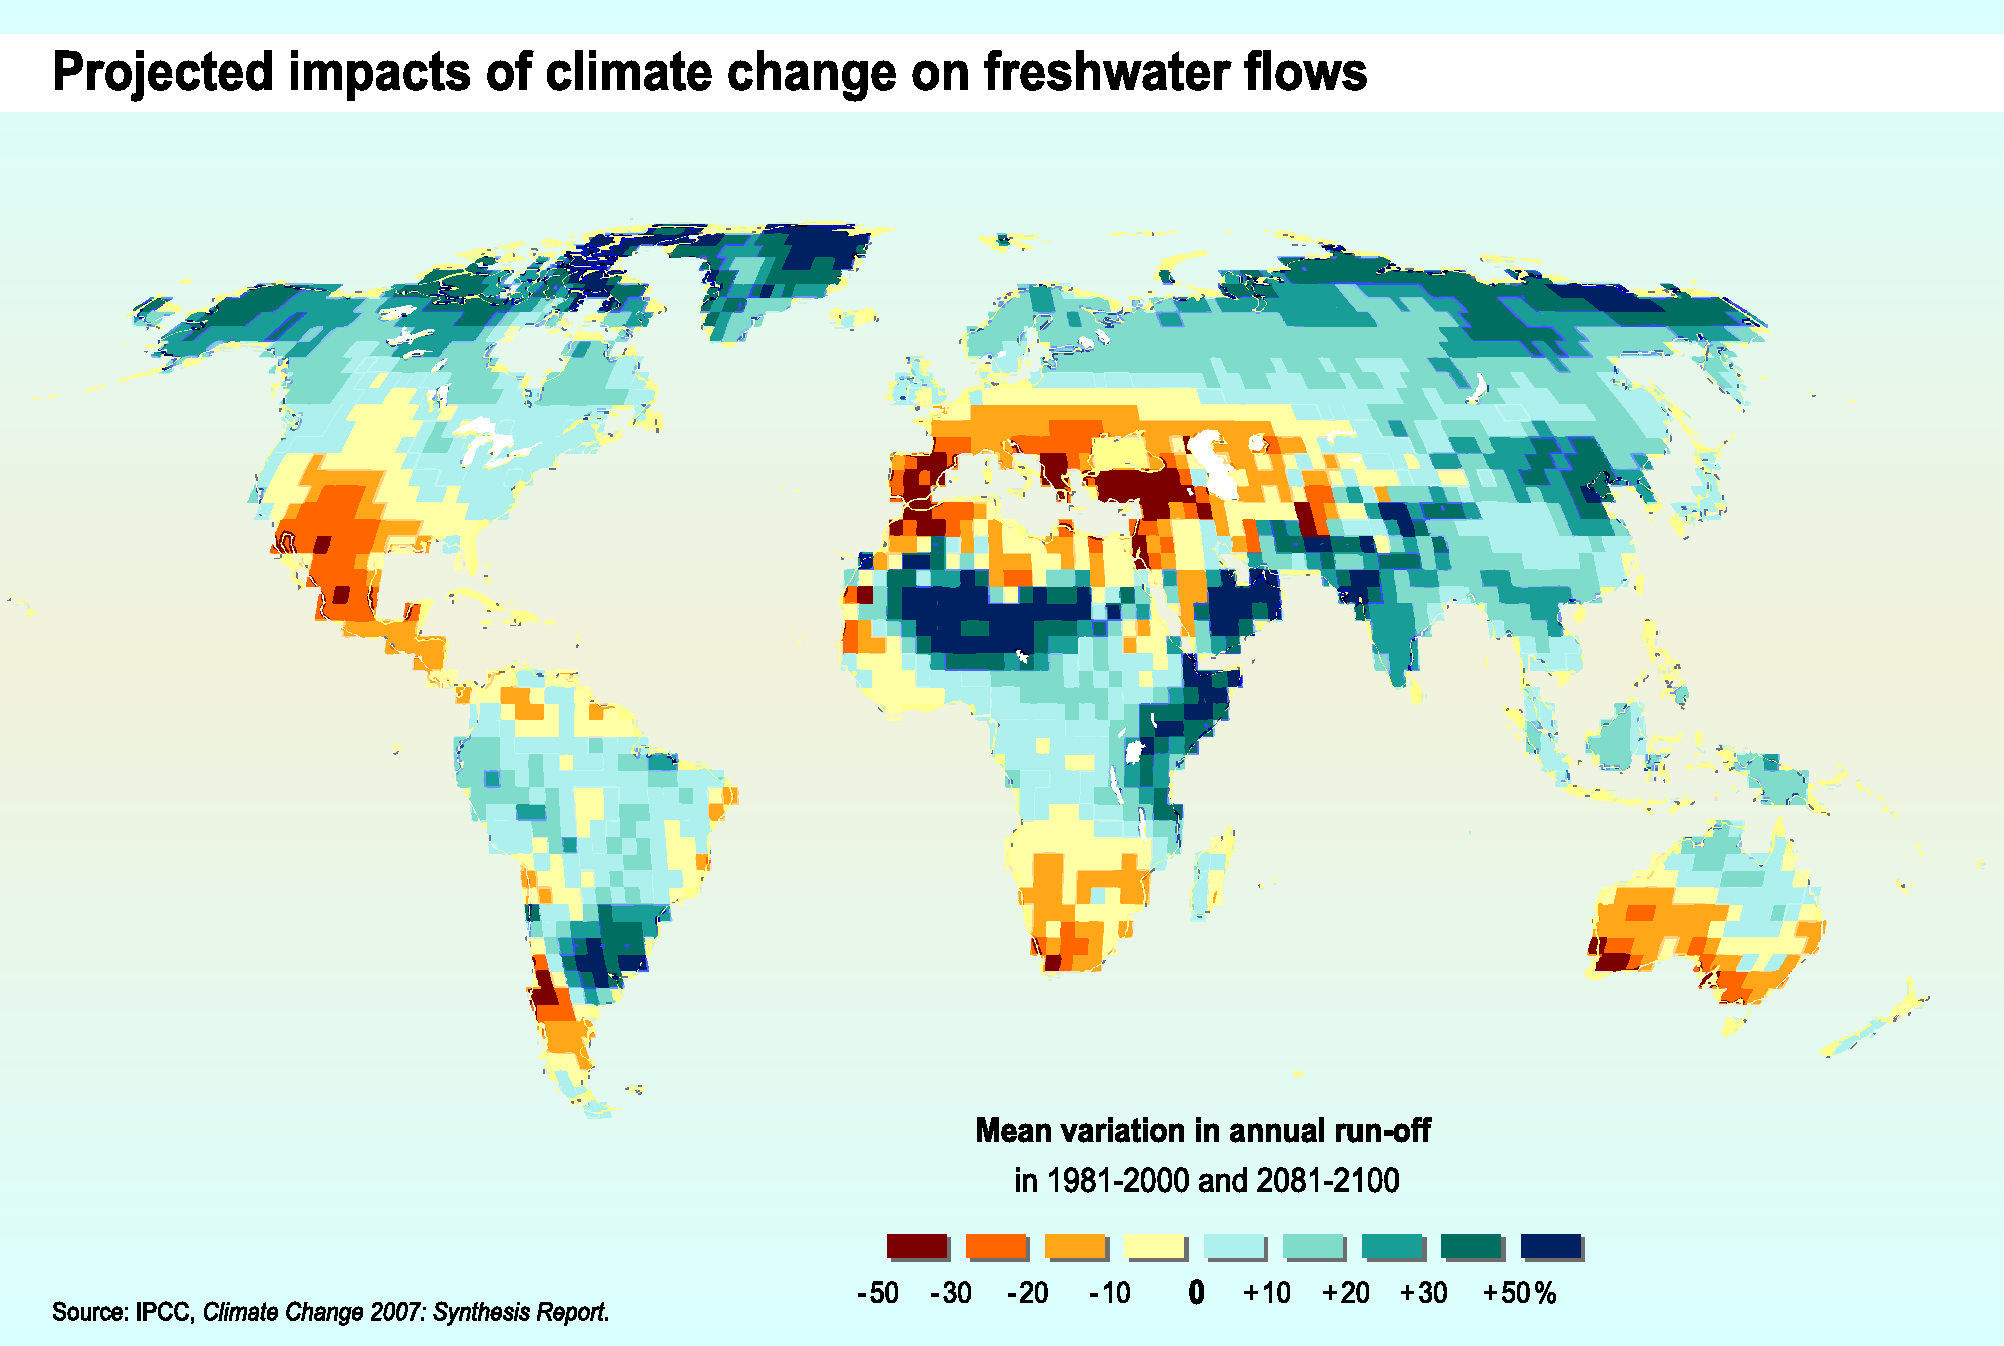 Projected impacts of climate change on freshwater flows